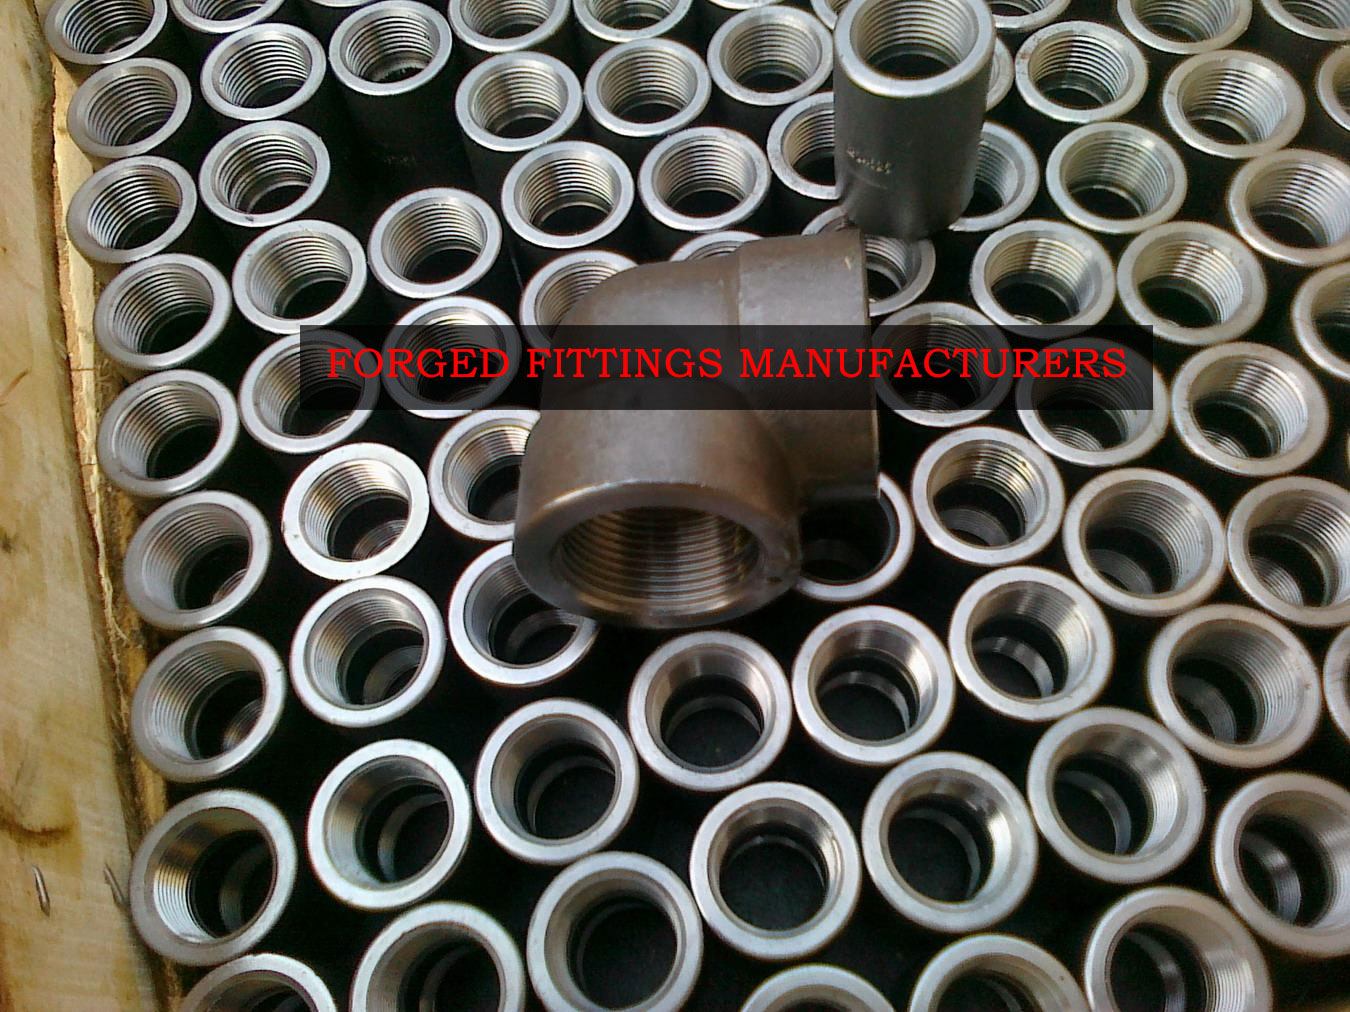 Alloy 20 / 254 SMO / AISI 4130 Forged Fittings Manufacturers, Threaded and Socket Weld Fittings in the Grade Alloy 20, 254 SMO, and AISI 4130